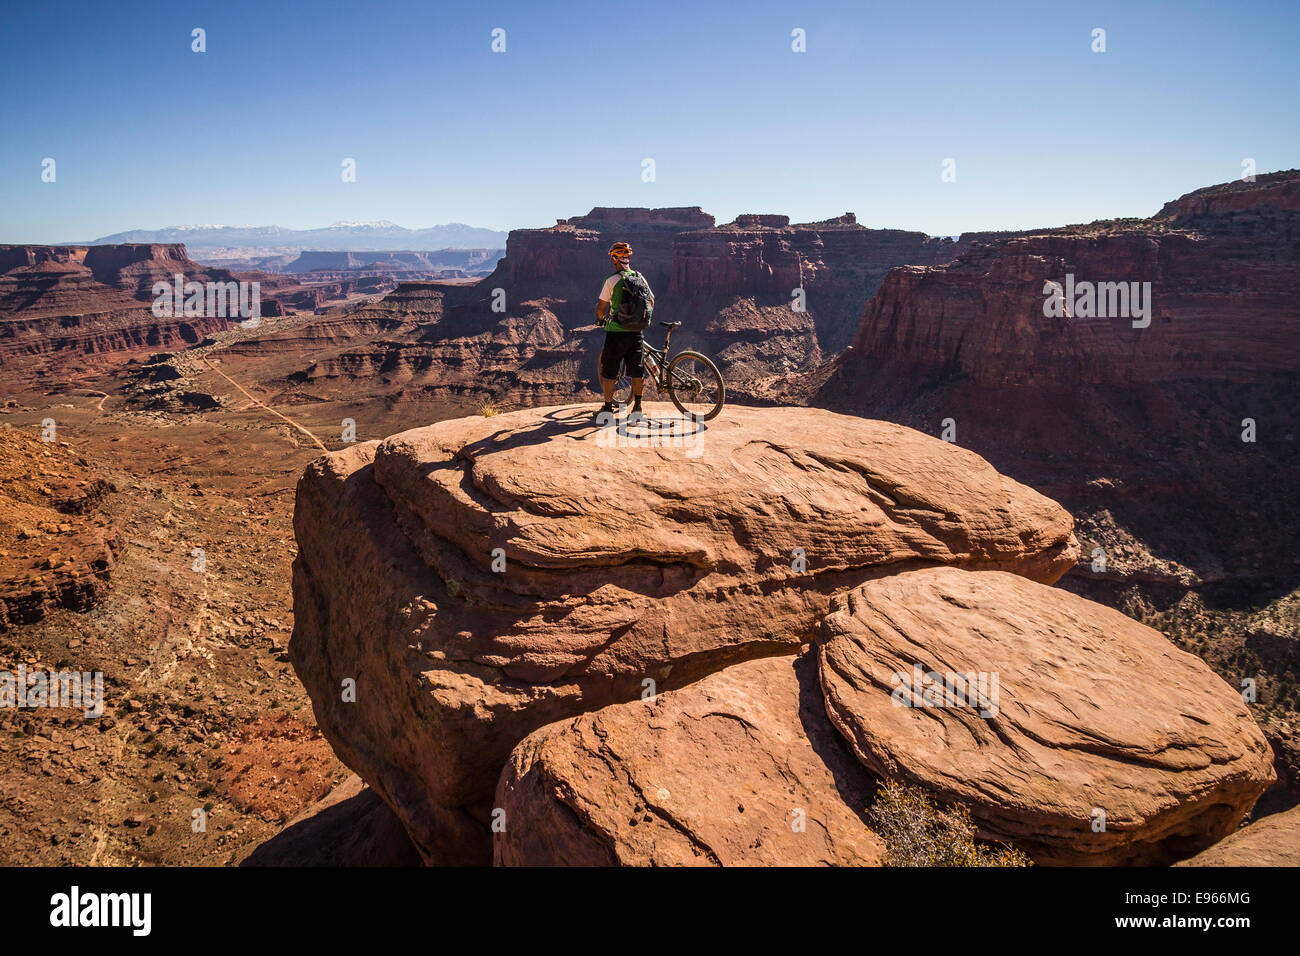 Whit Richardson stand with his mountain bike overlooking Shafer Canyon on the White Rim trail, Canyonlands National Park, Moab, Stock Photo